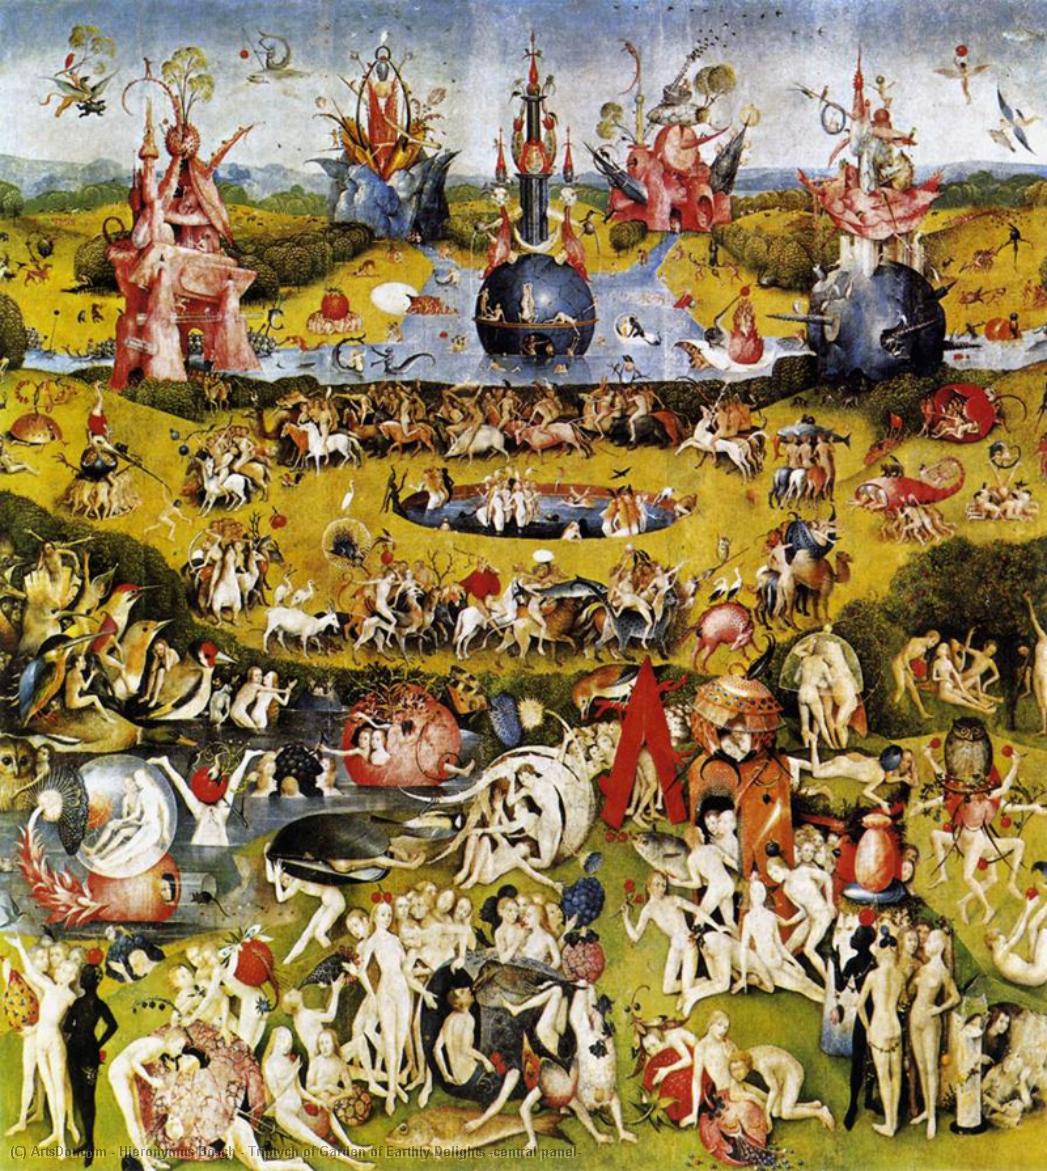 WikiOO.org - Encyclopedia of Fine Arts - Festés, Grafika Hieronymus Bosch - Triptych of Garden of Earthly Delights (central panel)